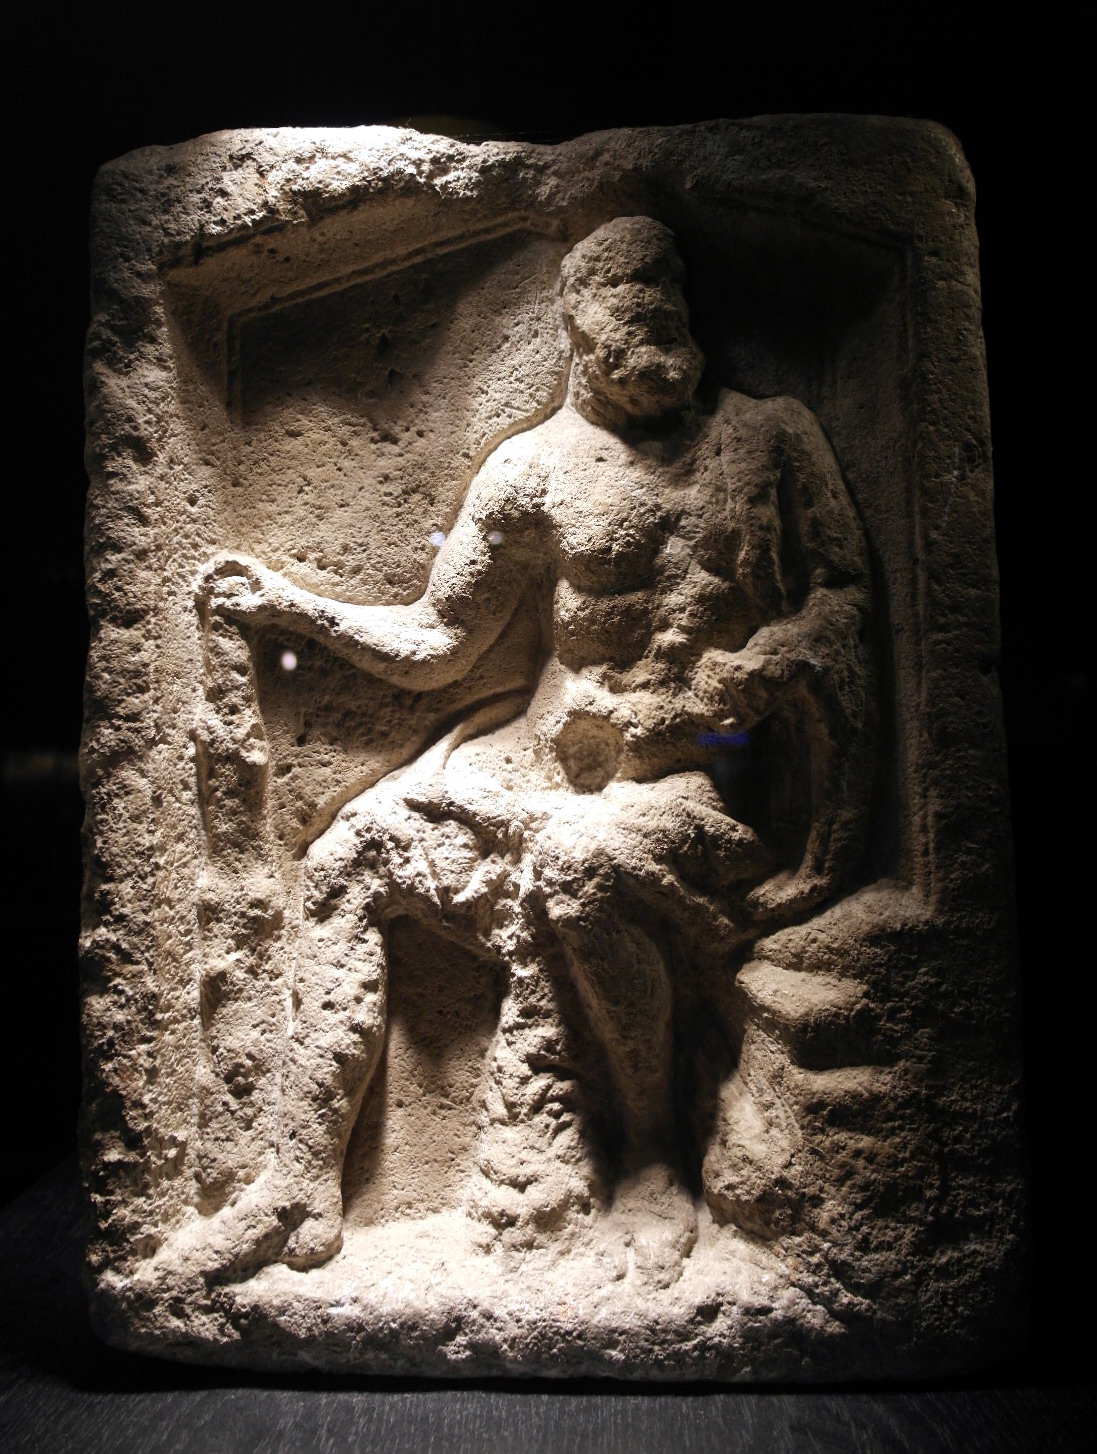 Relief of Hercules with a club from excavation of Sanctuary of Jupiter, Maastricht.